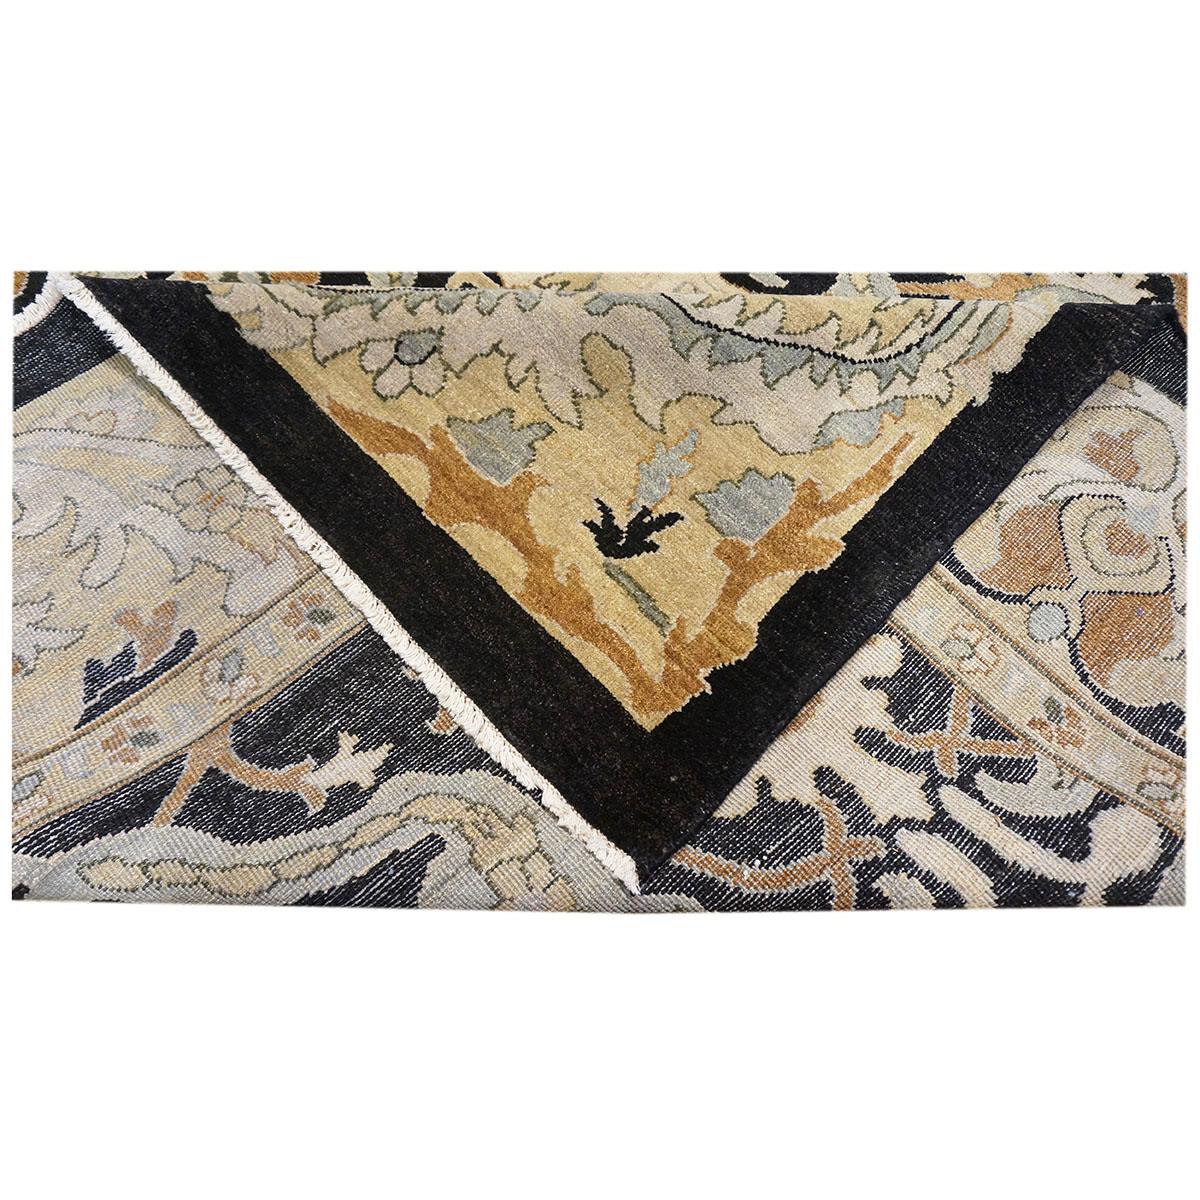 Contemporary 21st Century Sultanabad 8x10 Tan and Black Handmade Wool Rug For Sale